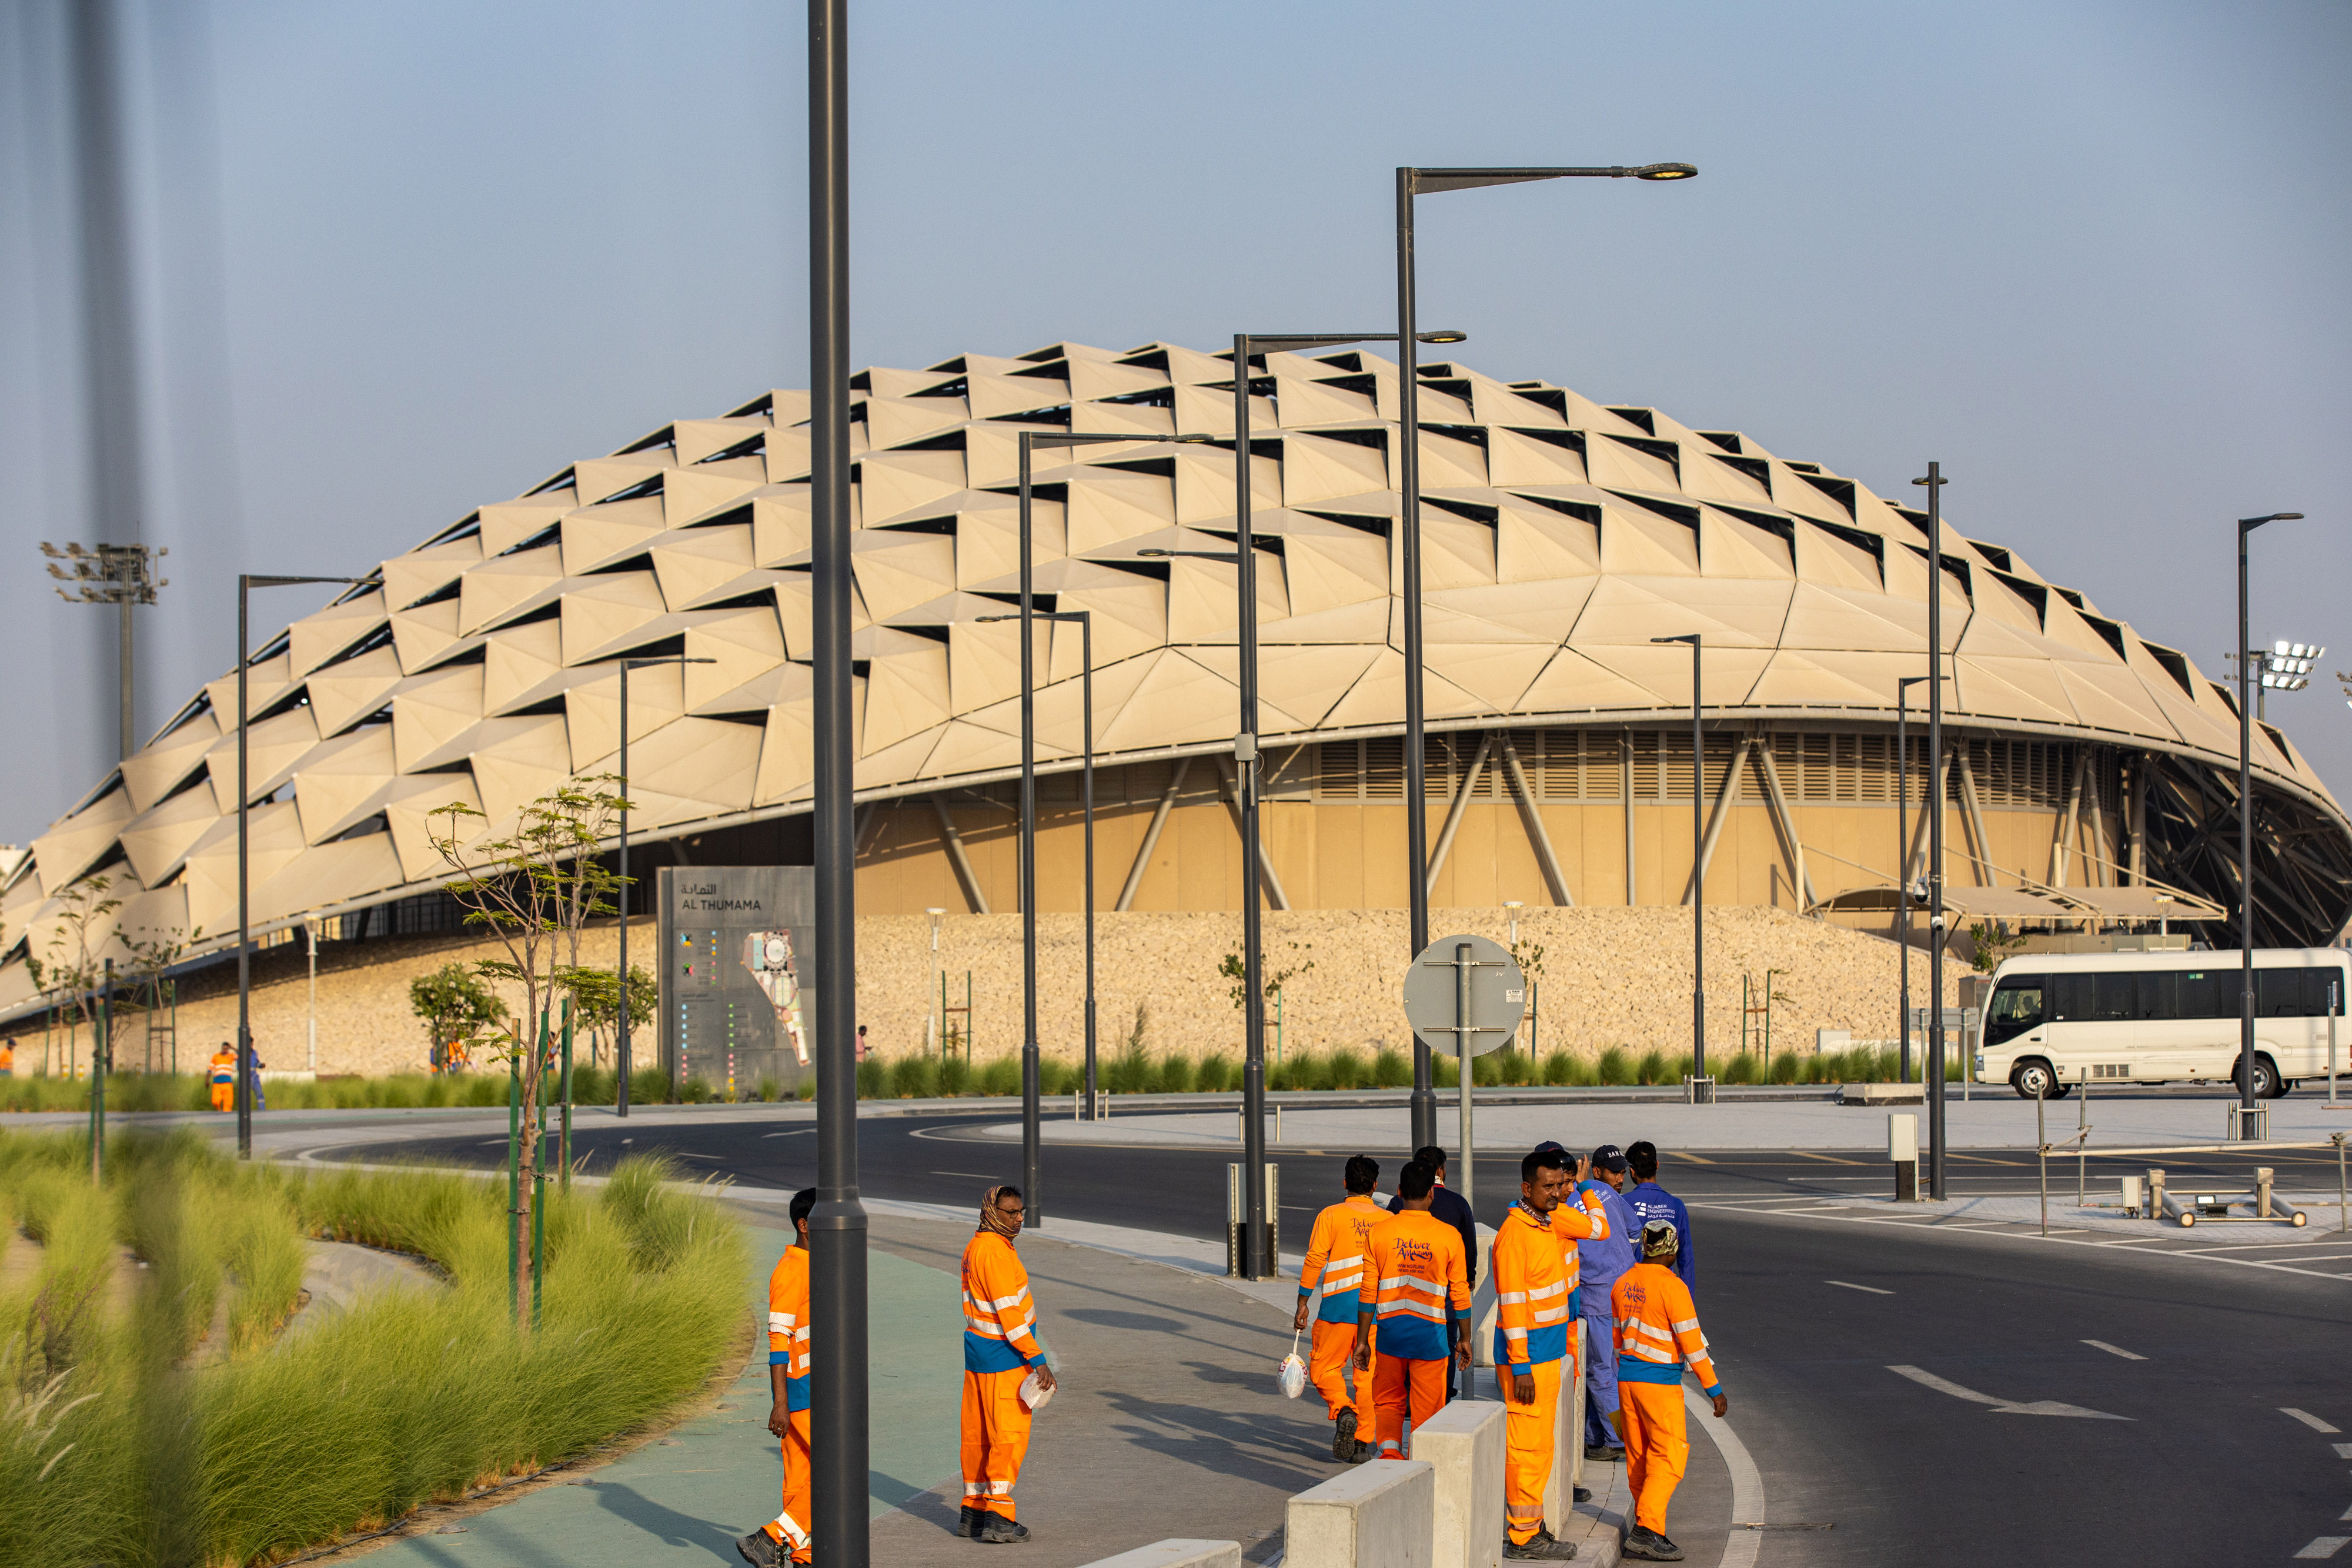 Workers in orange uniforms stand in front of Qatar’s 2022 FIFA World Cup Al Thumama Football Stadium, which is shaped like a cream-colored dome.